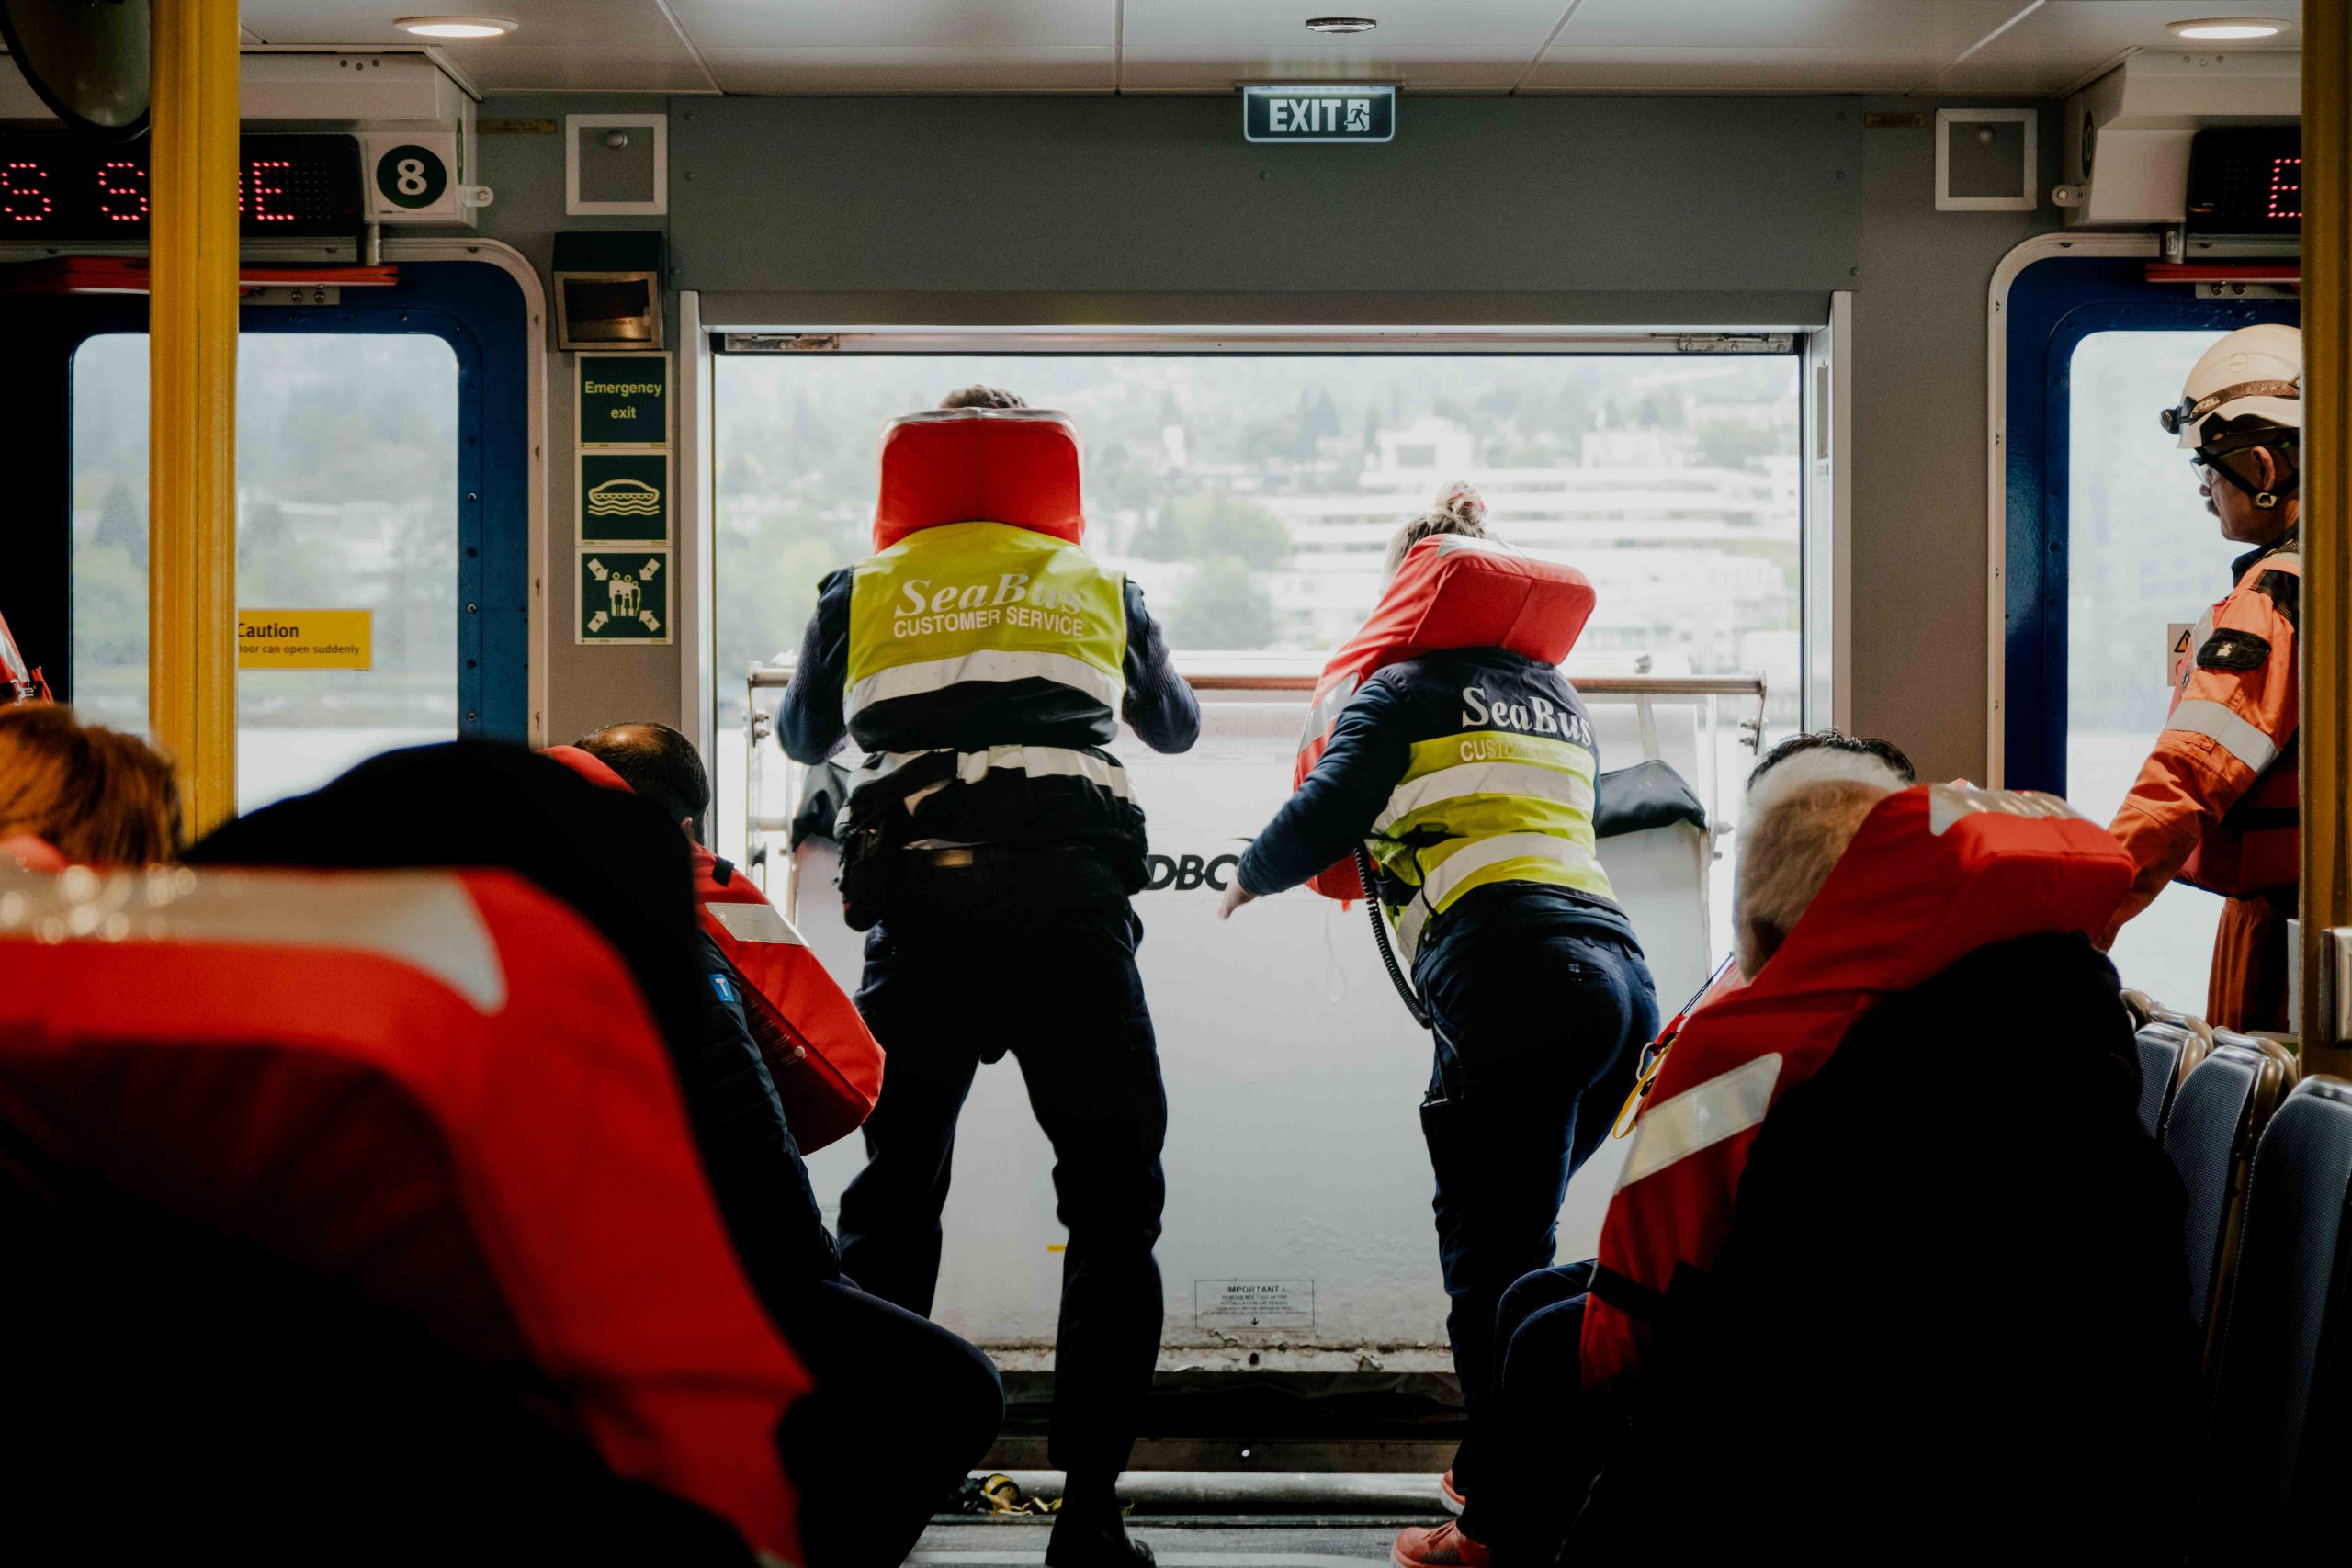 Two SeaBus crew members deploy one of the life rafts